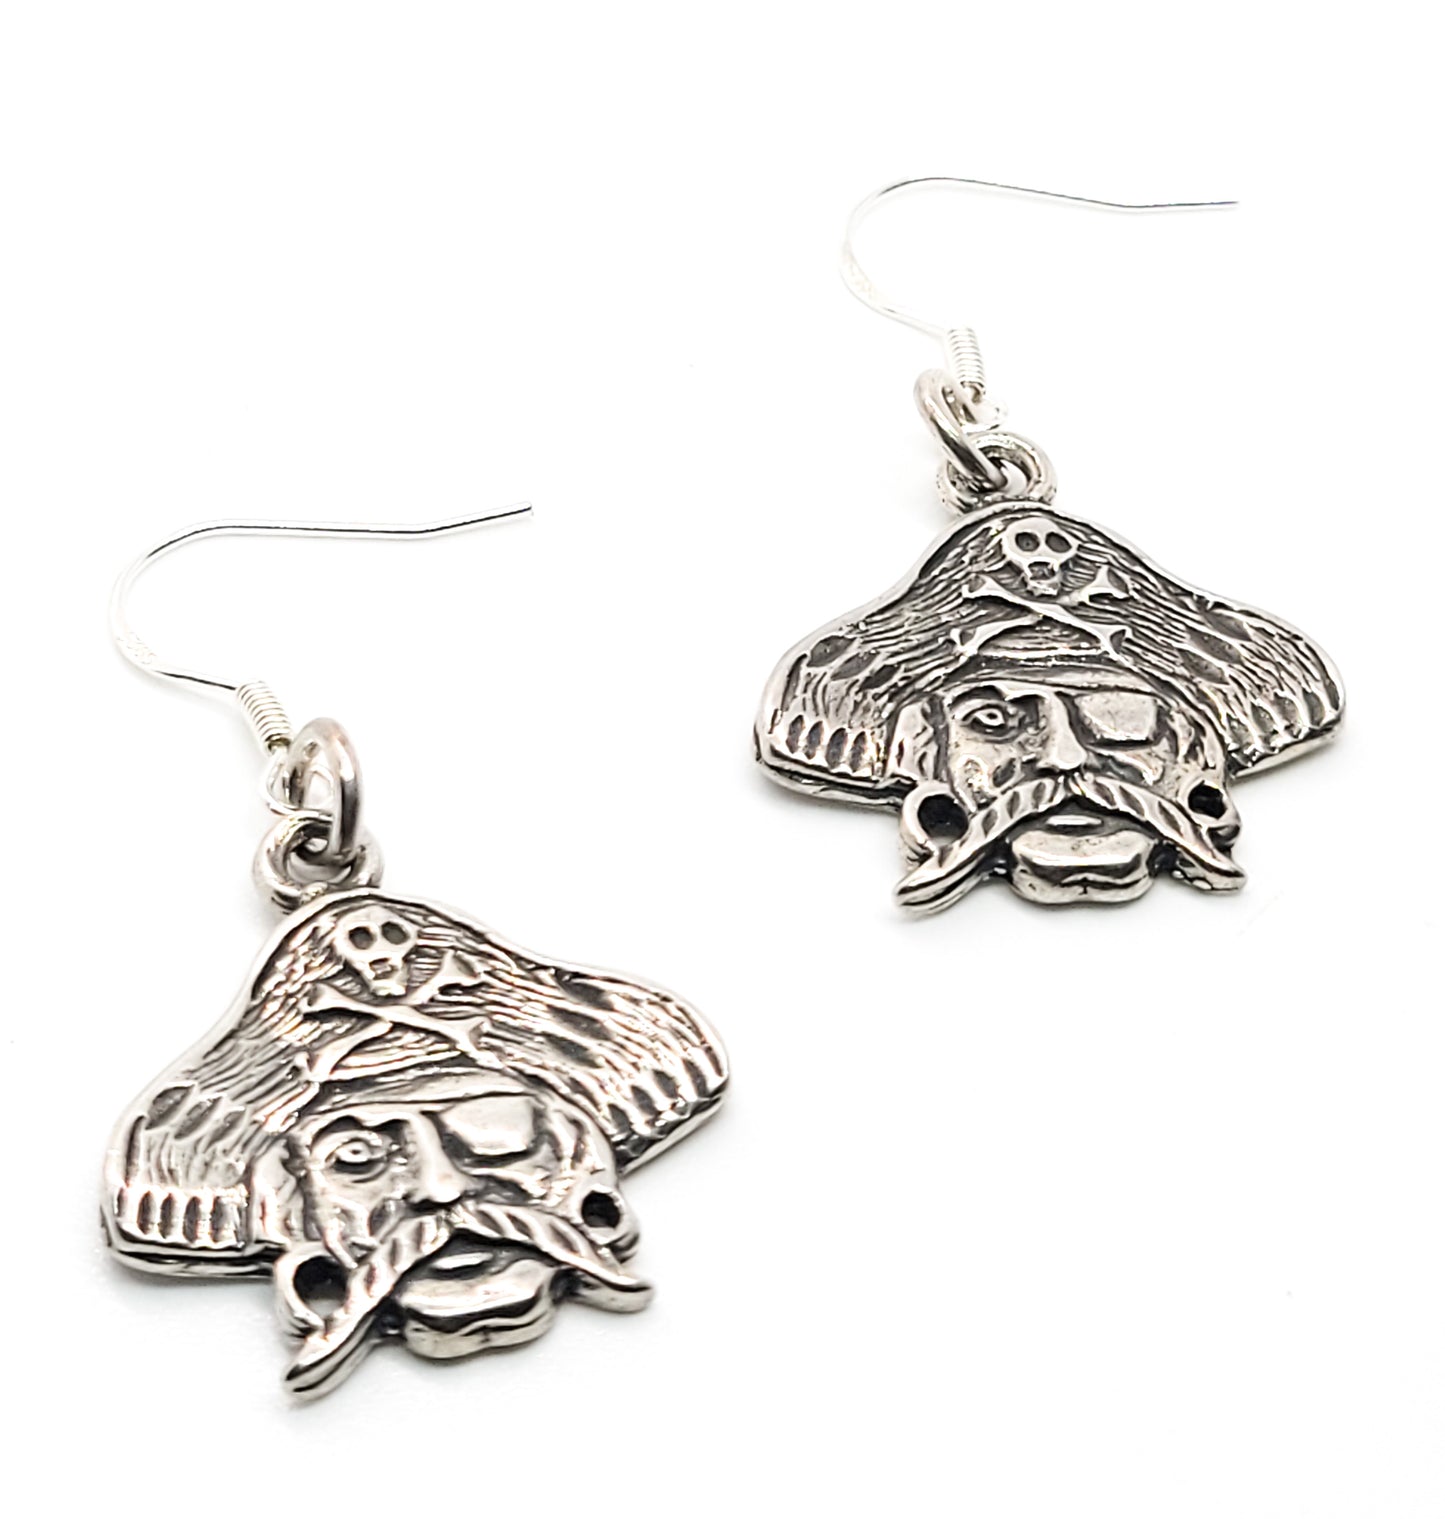 Captain of the ship Pirate with eye patch and hat sterling silver drop earrings 925